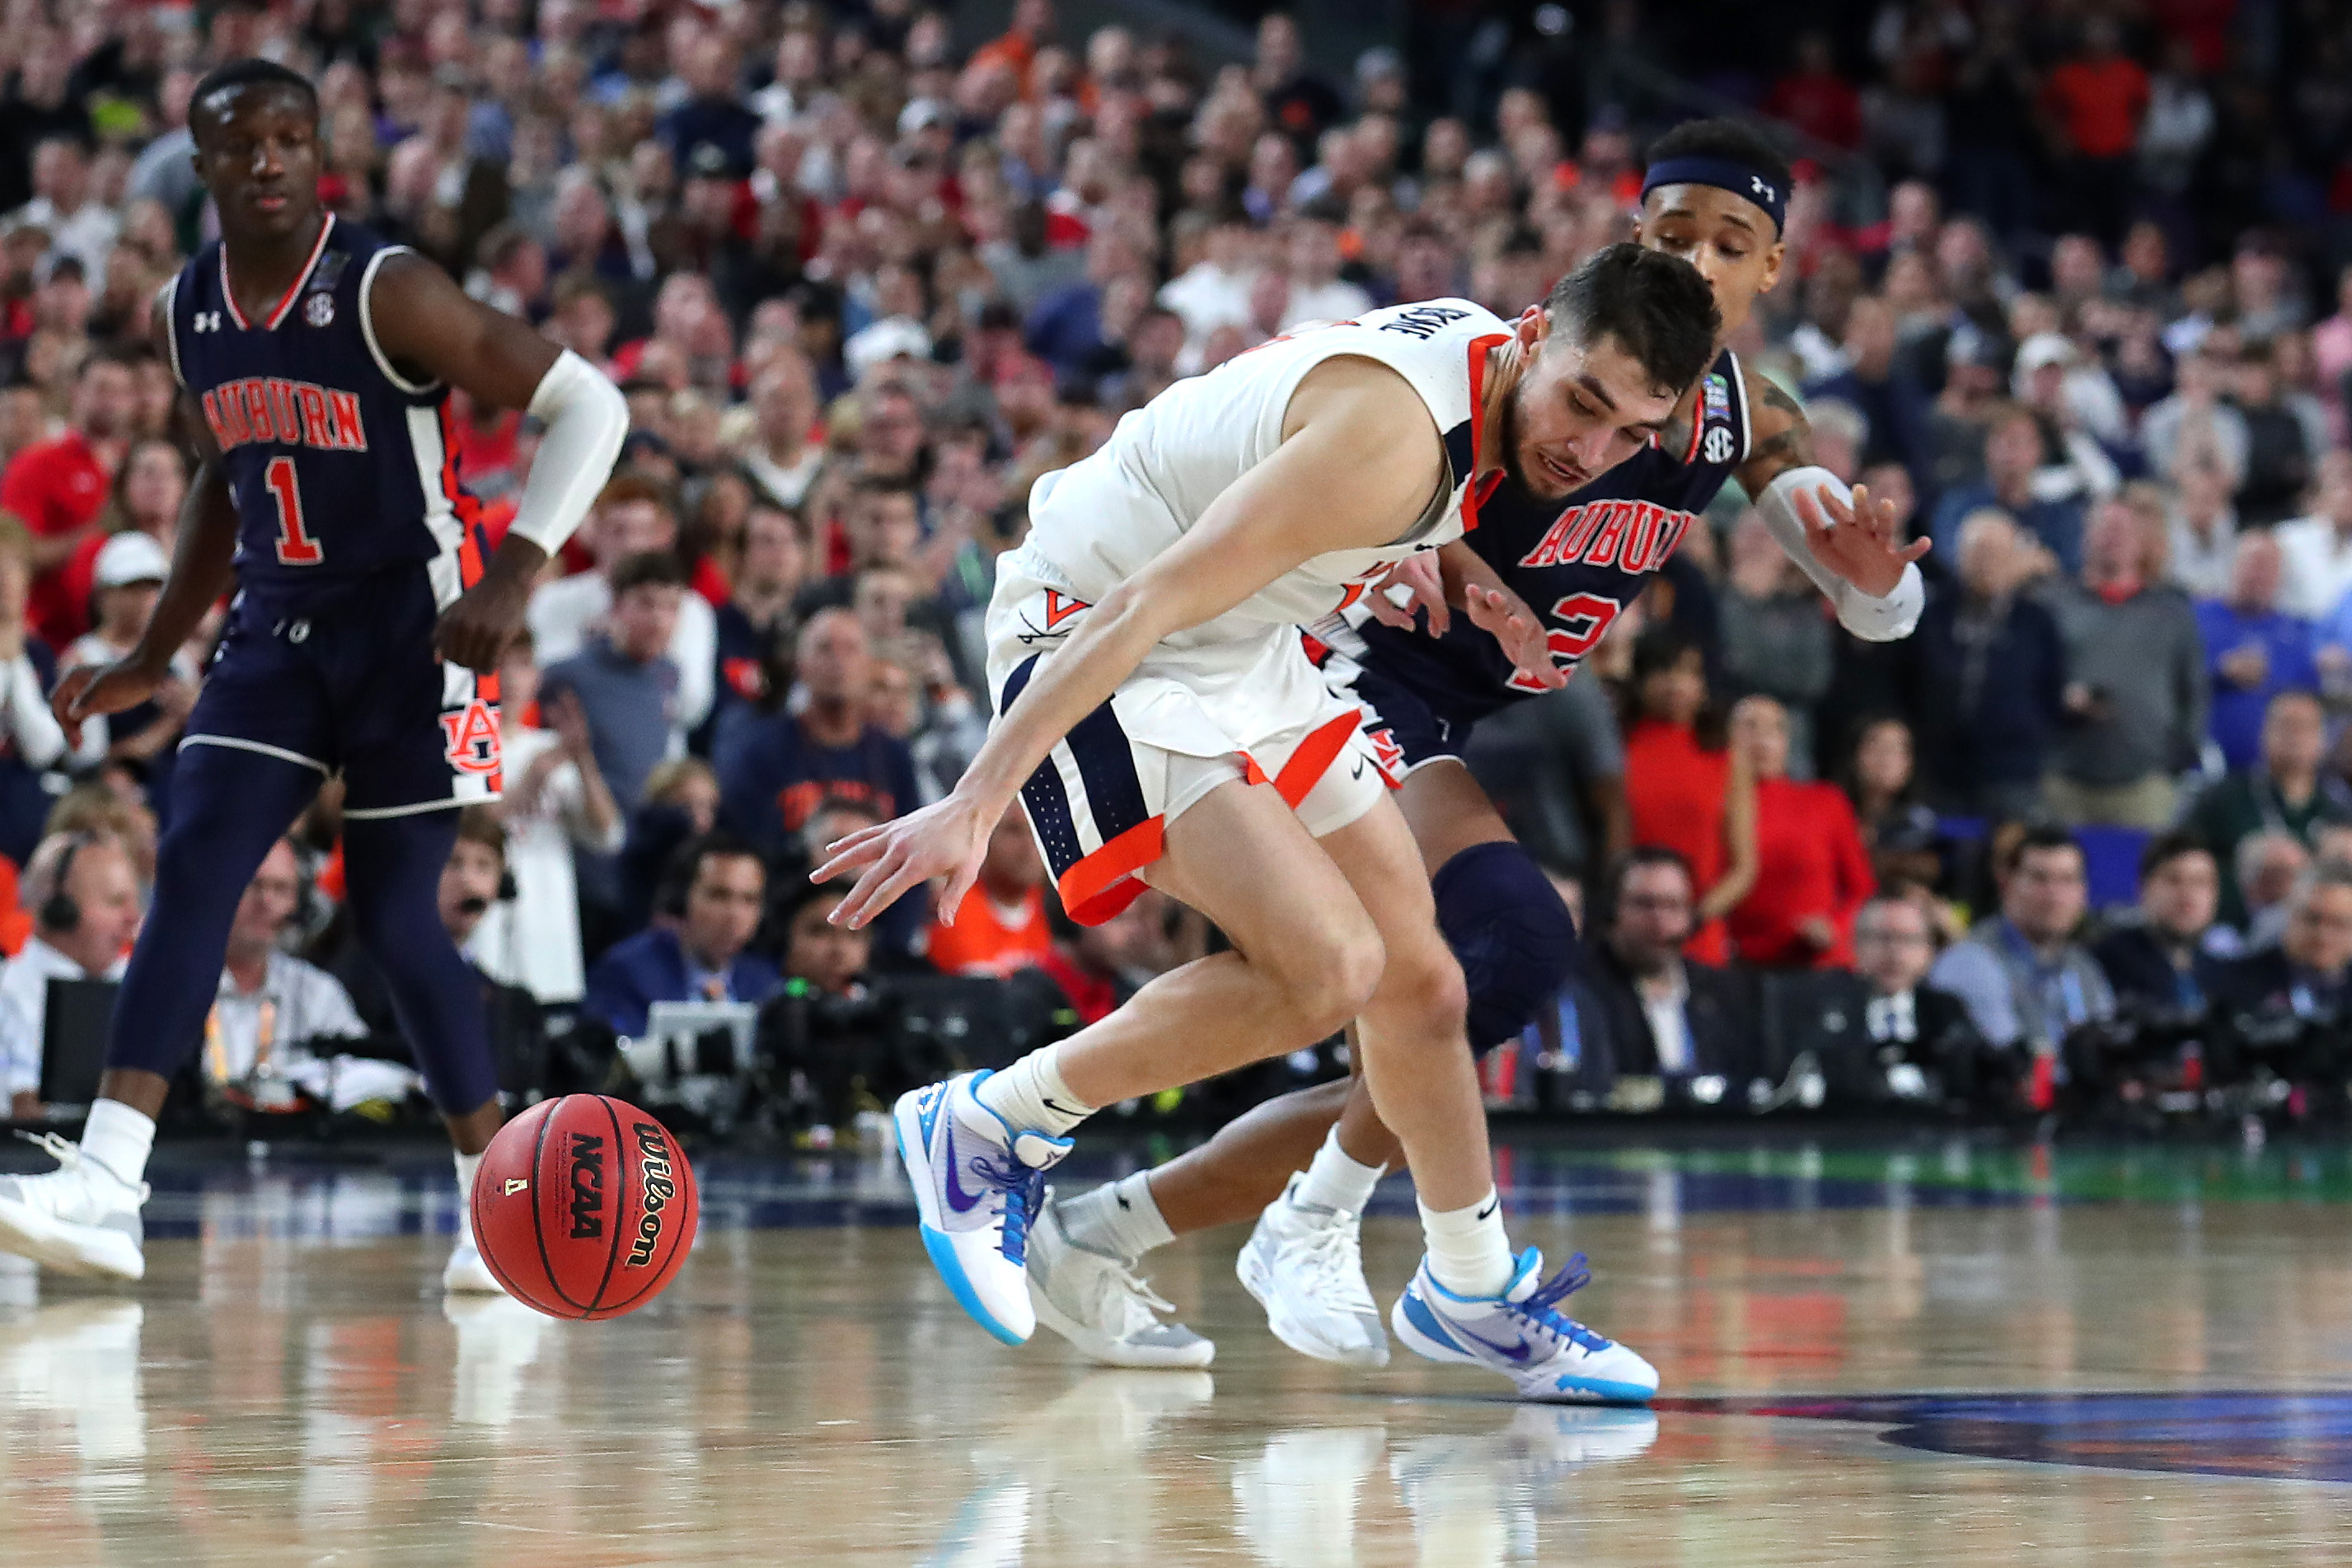 Virginia Cavaliers guard Ty Jerome thrives on doubter and beating